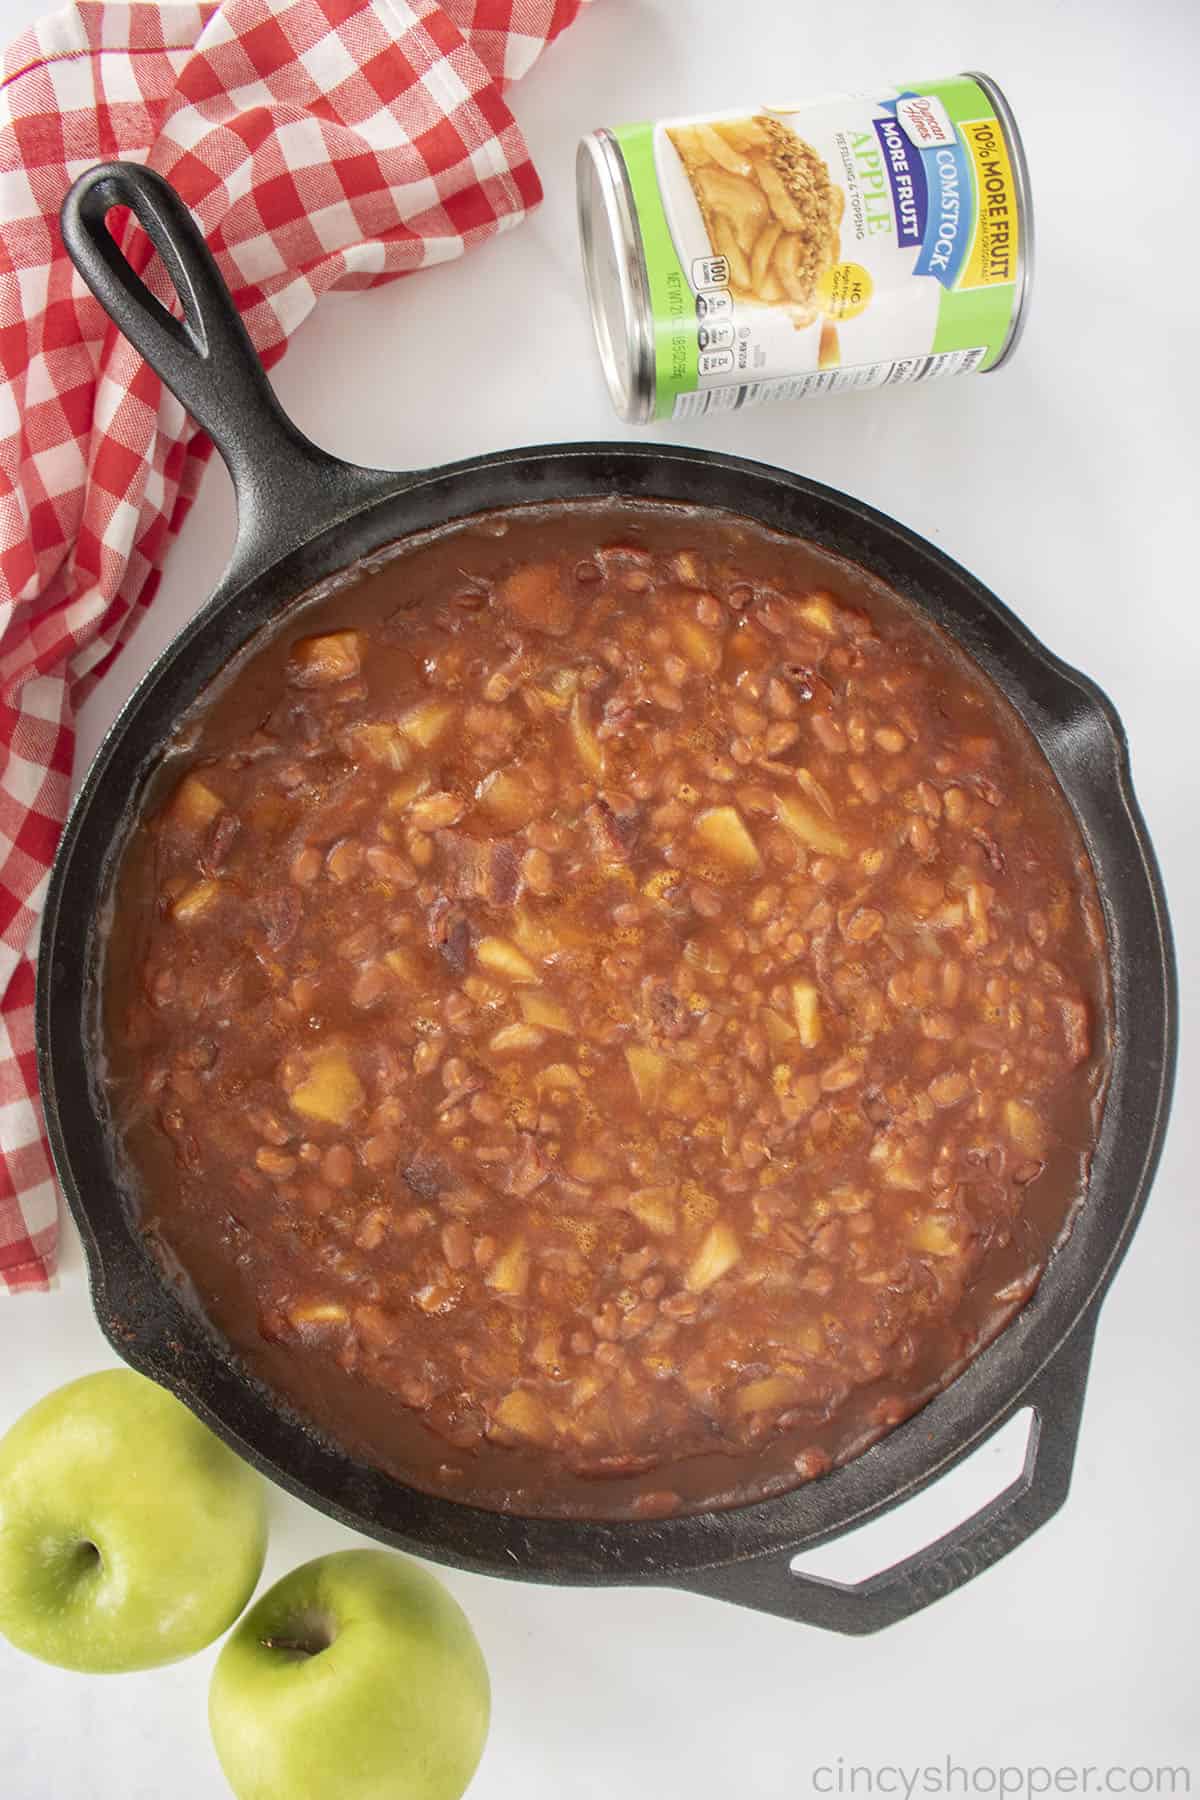 Apple Pie Baked Beans in a cast iron skillet.